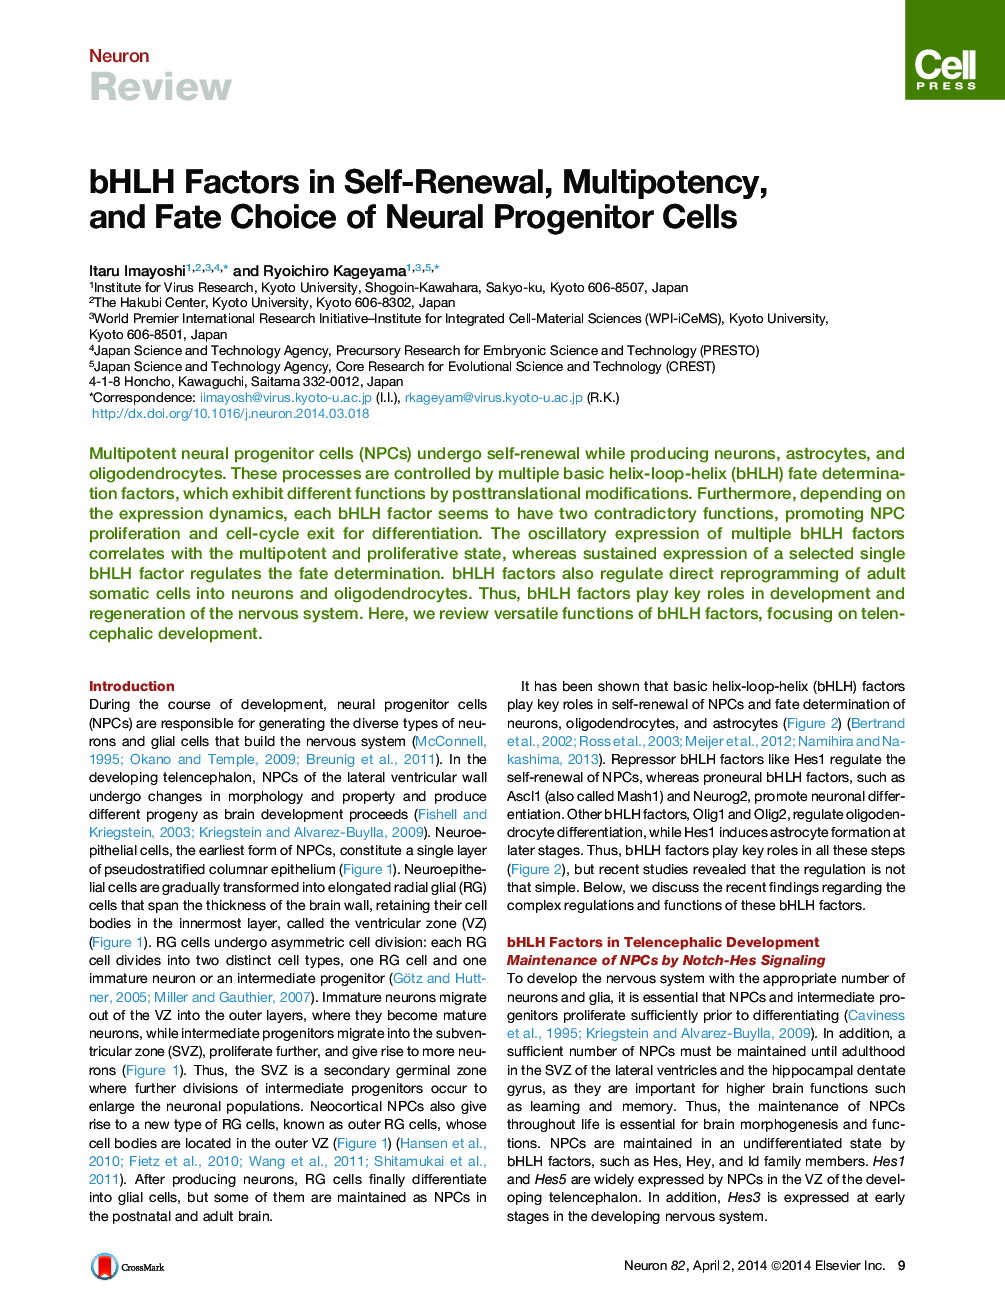 bHLH Factors in Self-Renewal, Multipotency, and Fate Choice of Neural Progenitor Cells